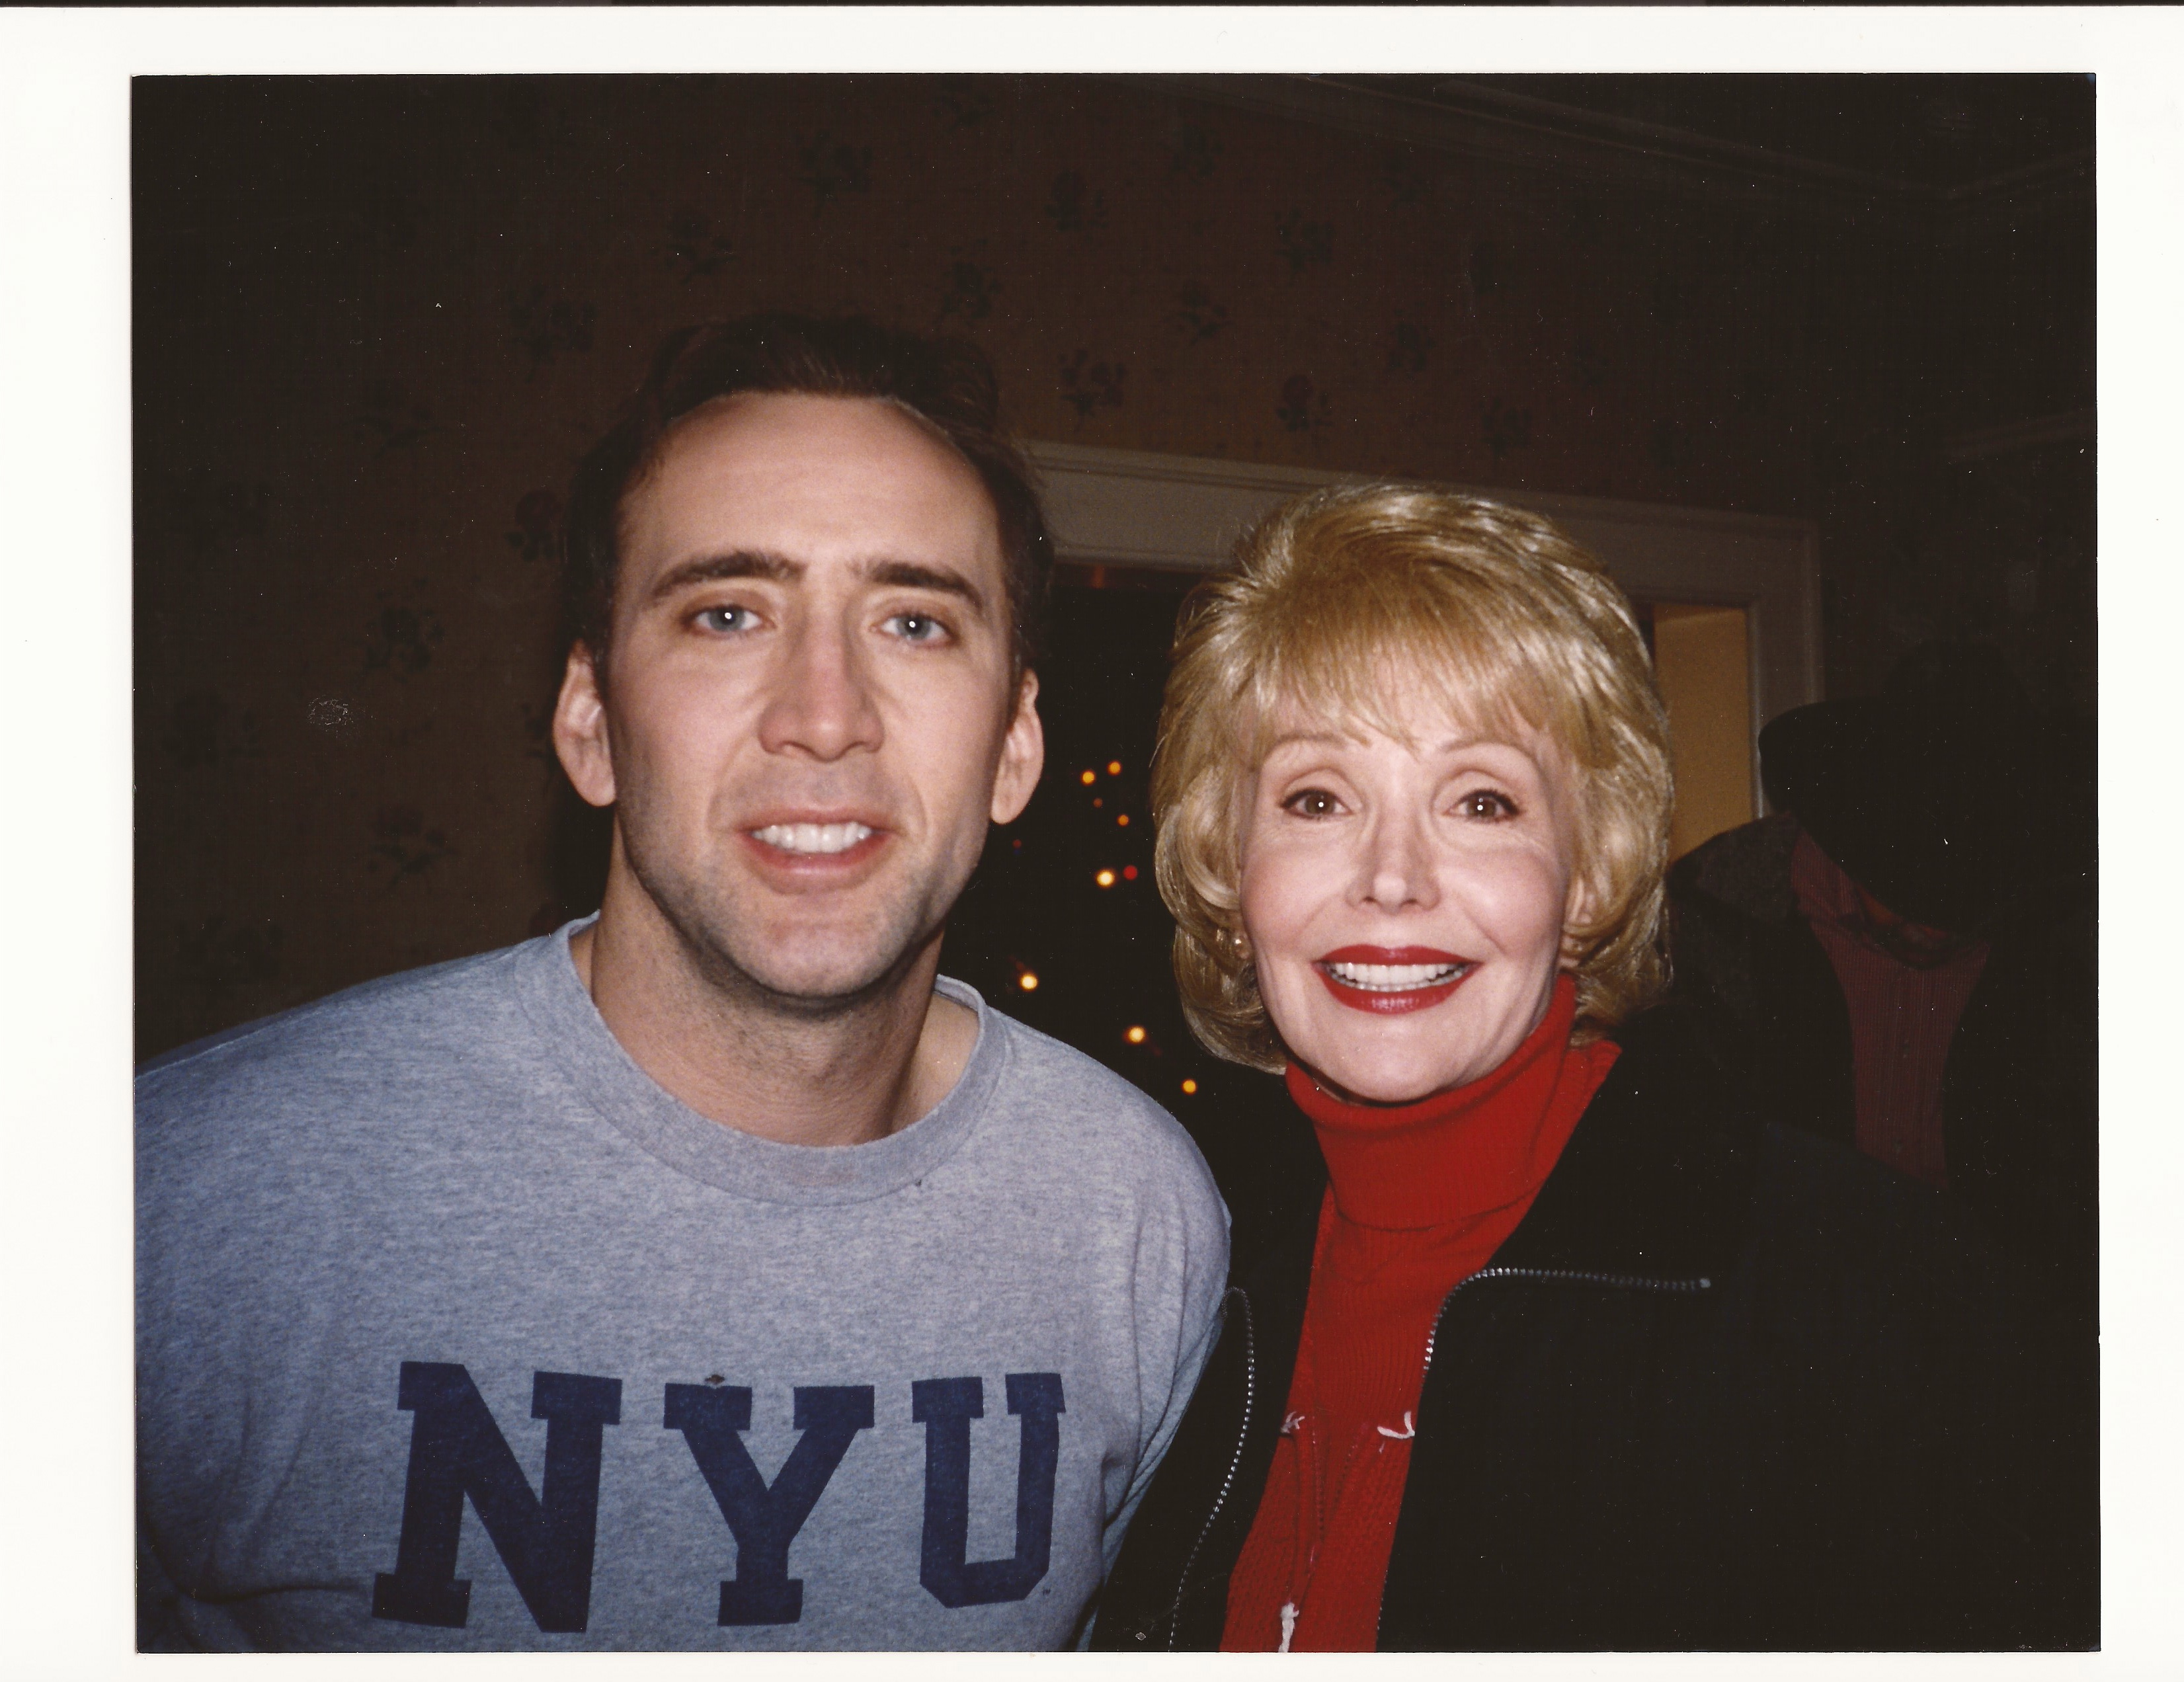 Francine York as Lorraine with Nicolas Cage in Family Man.